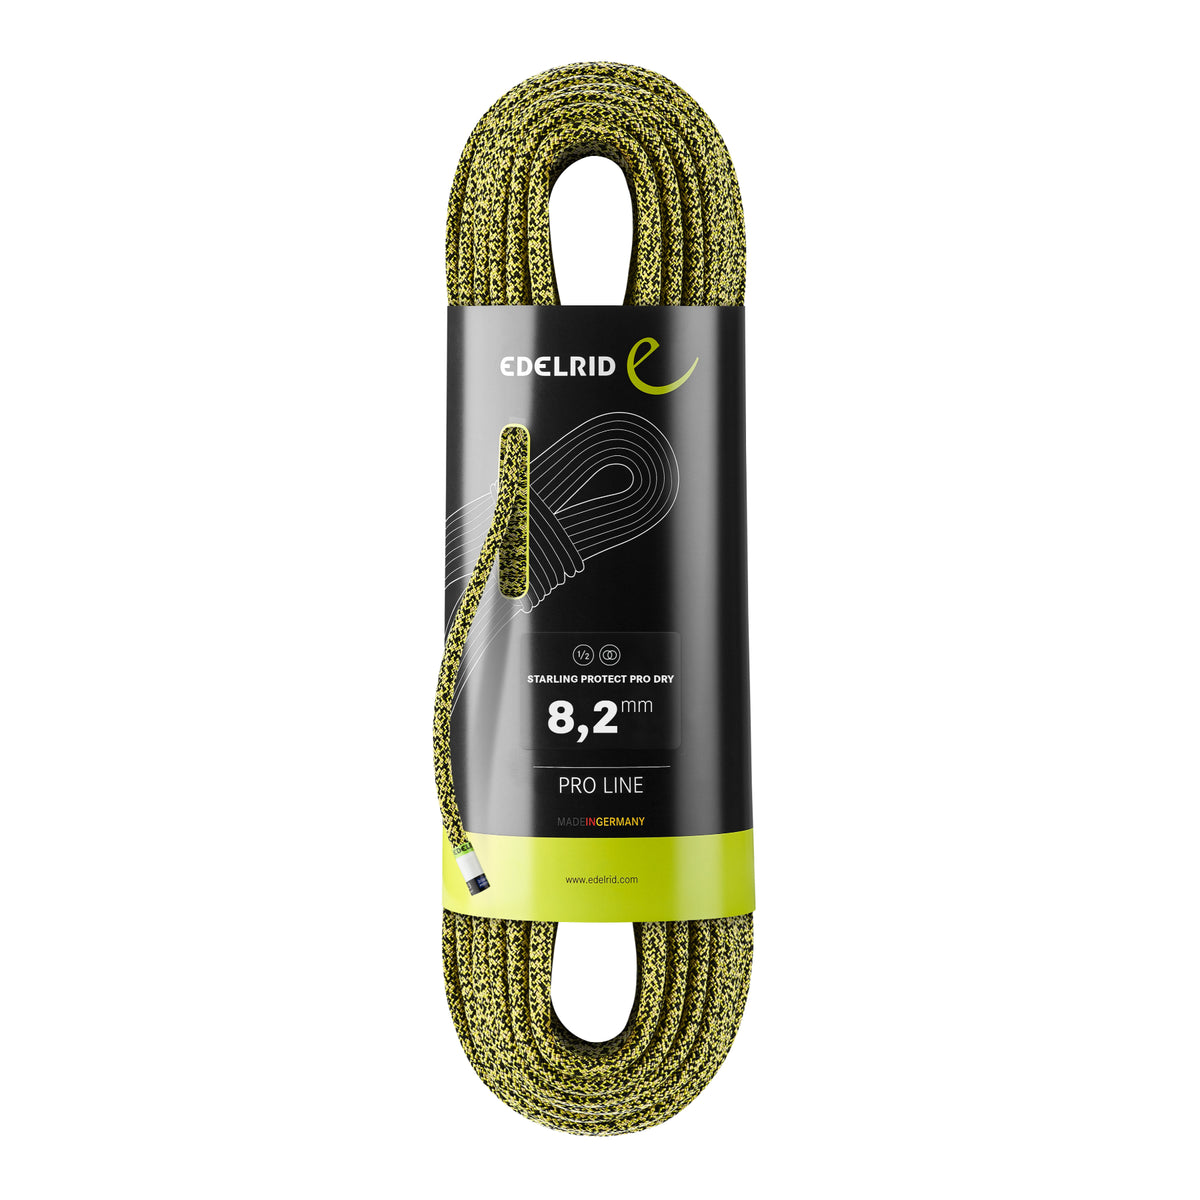 Edelrid Starling Pro Dry 8.2mm x 60m, in Yellow Night colour